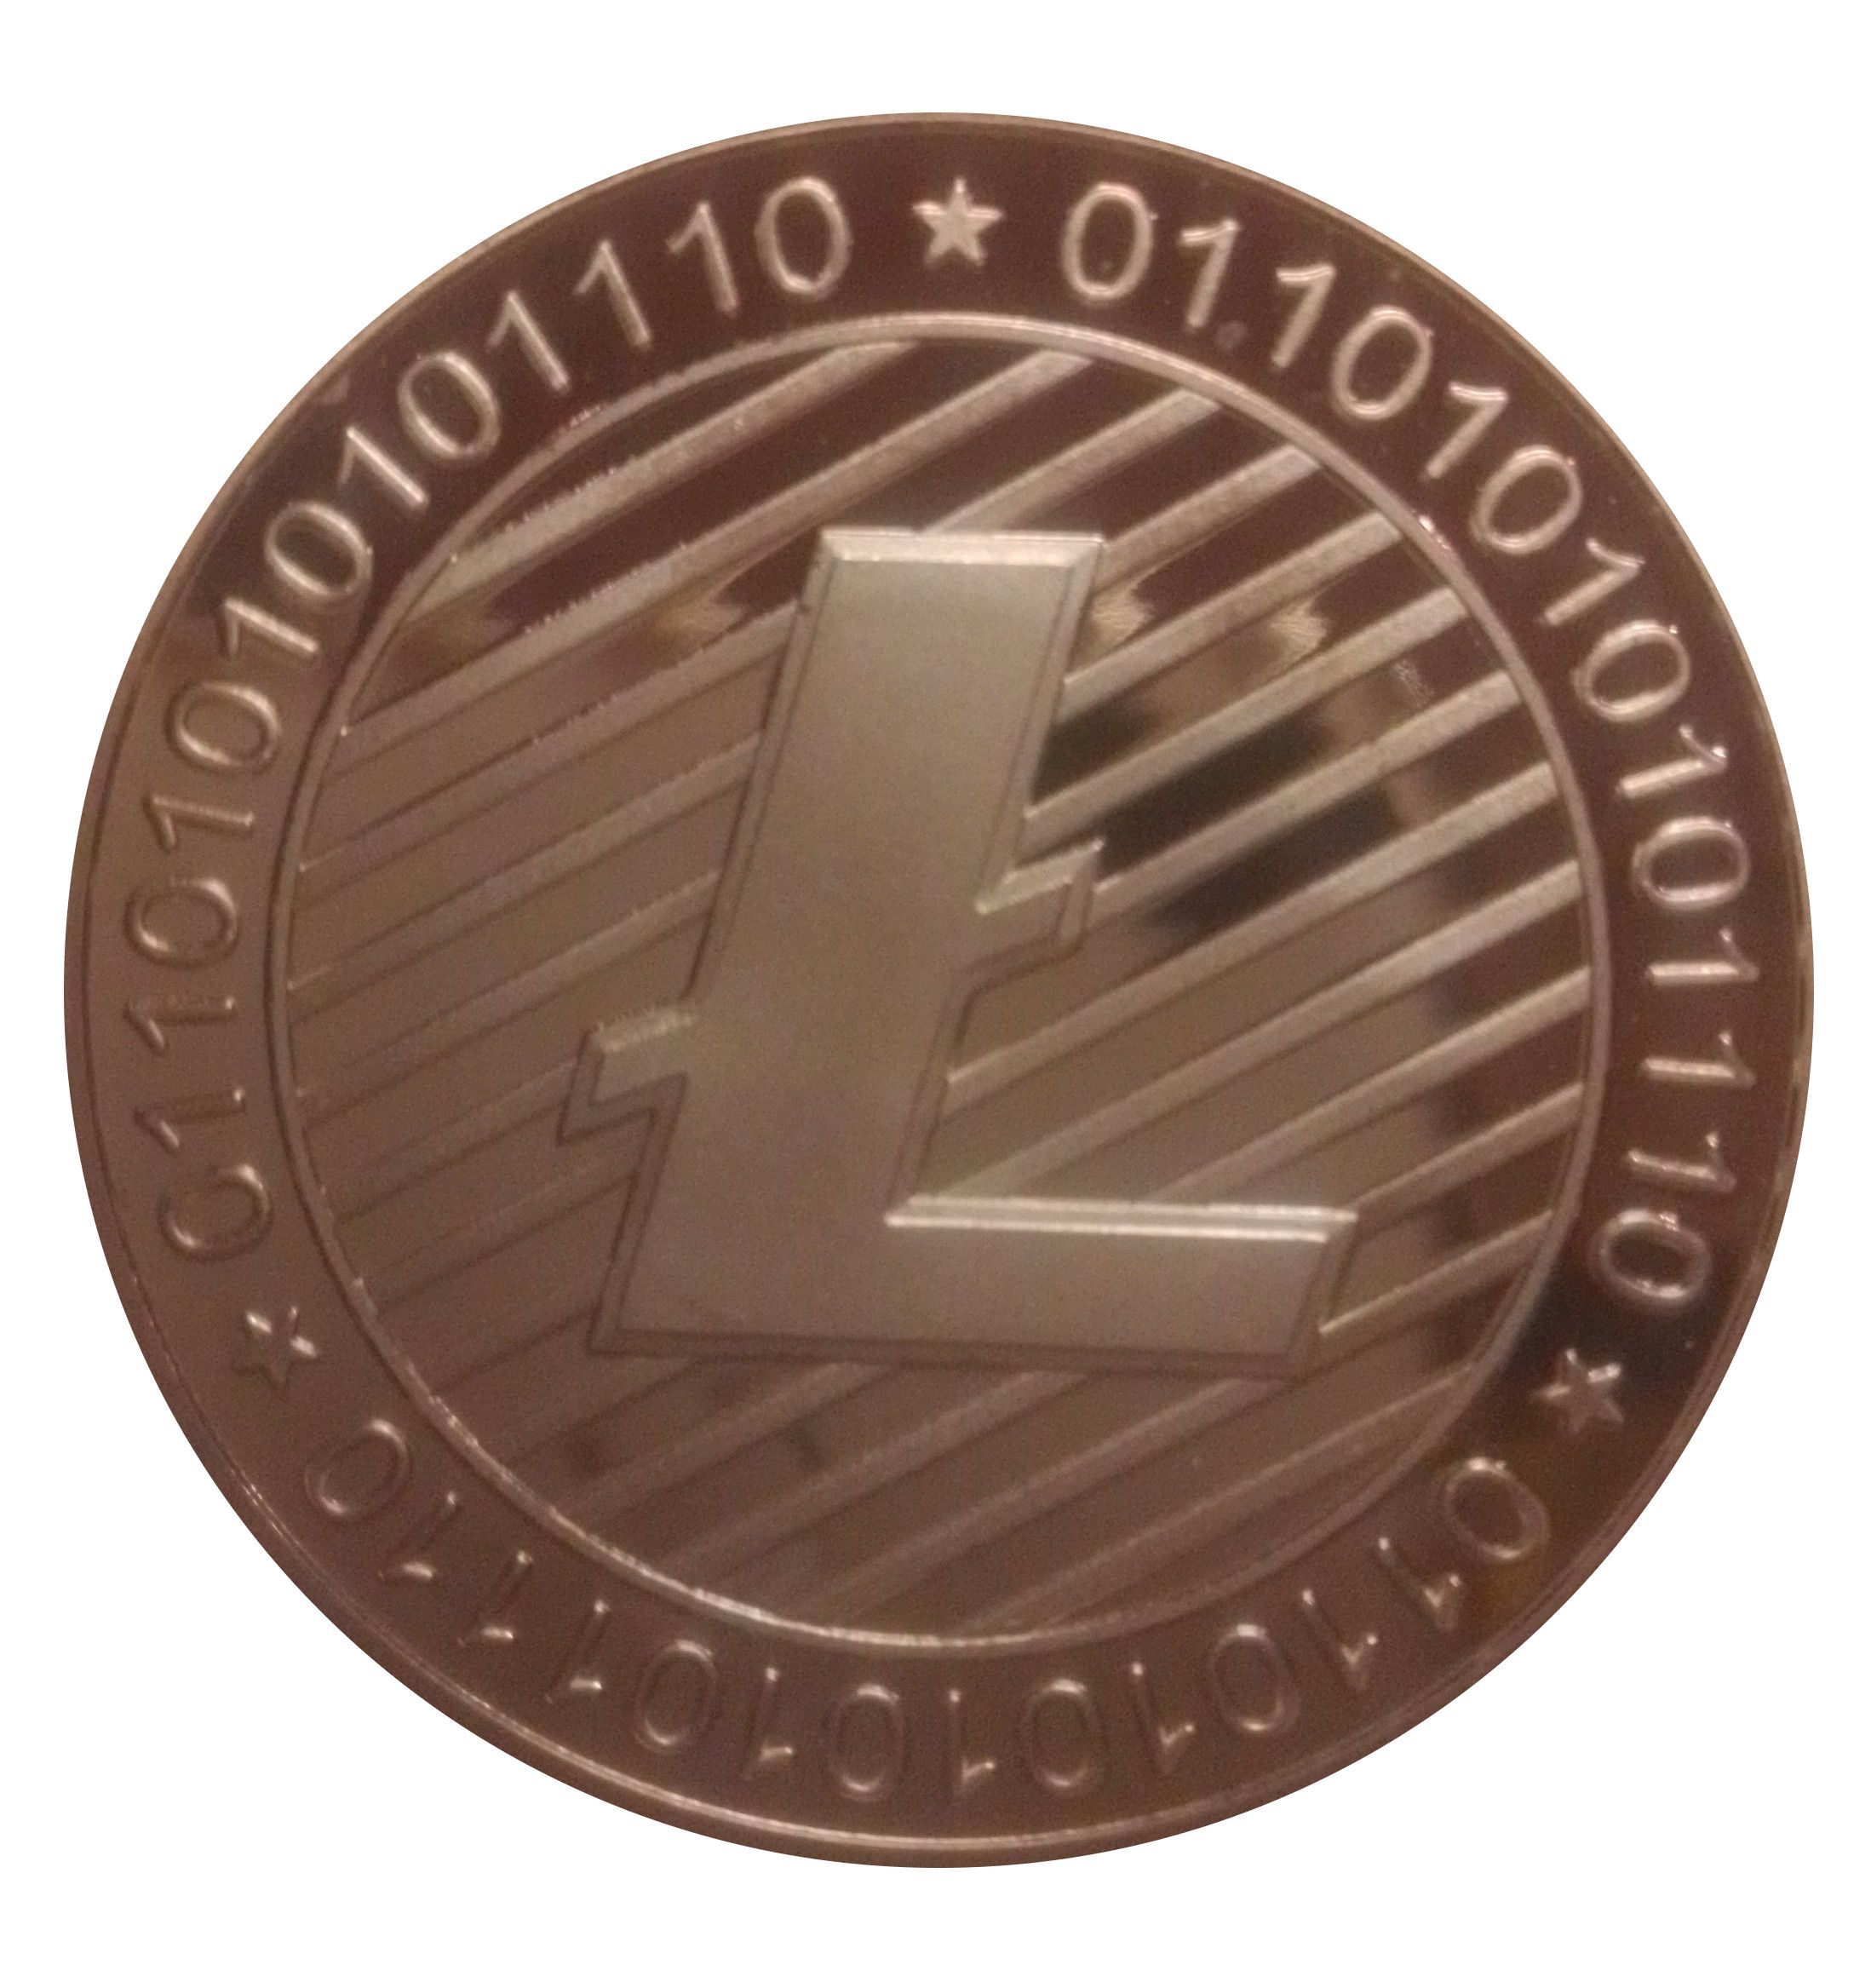 Buy Litecoin (LTC) - Step by step guide for buying LTC | Ledger